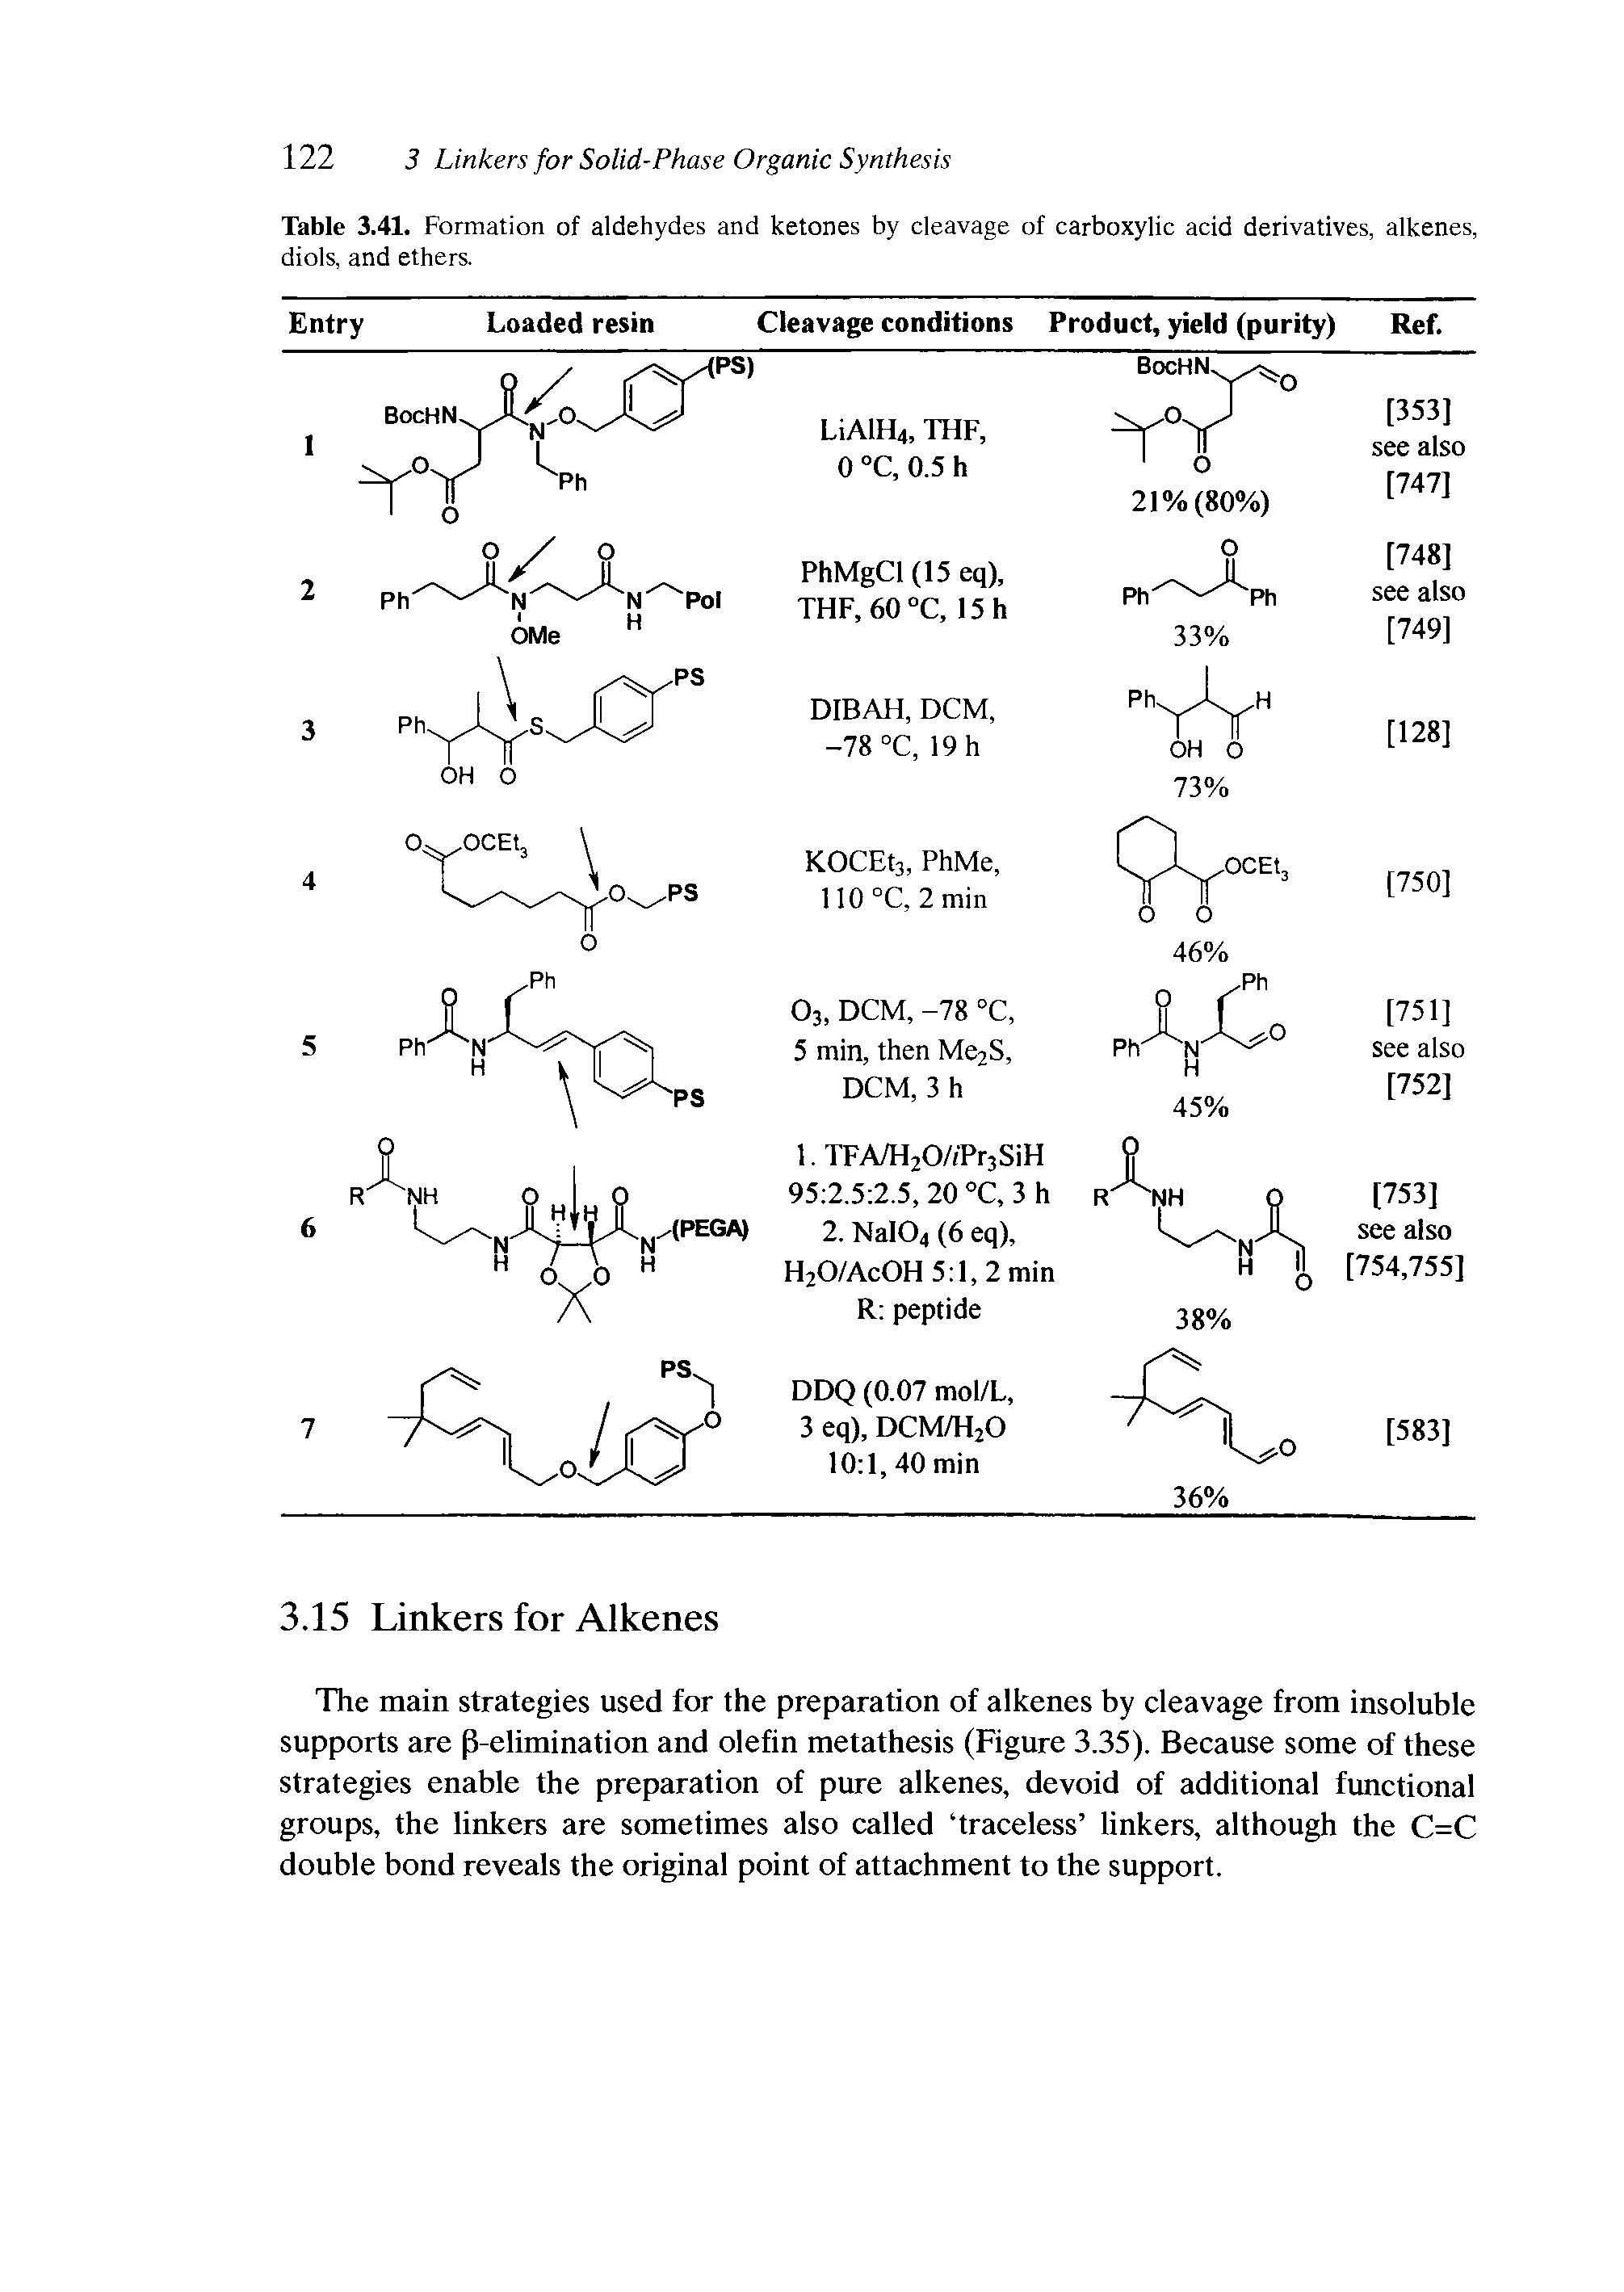 Table 3.41. Formation of aldehydes and ketones by cleavage of carboxylic acid derivatives, alkenes, diols, and ethers.